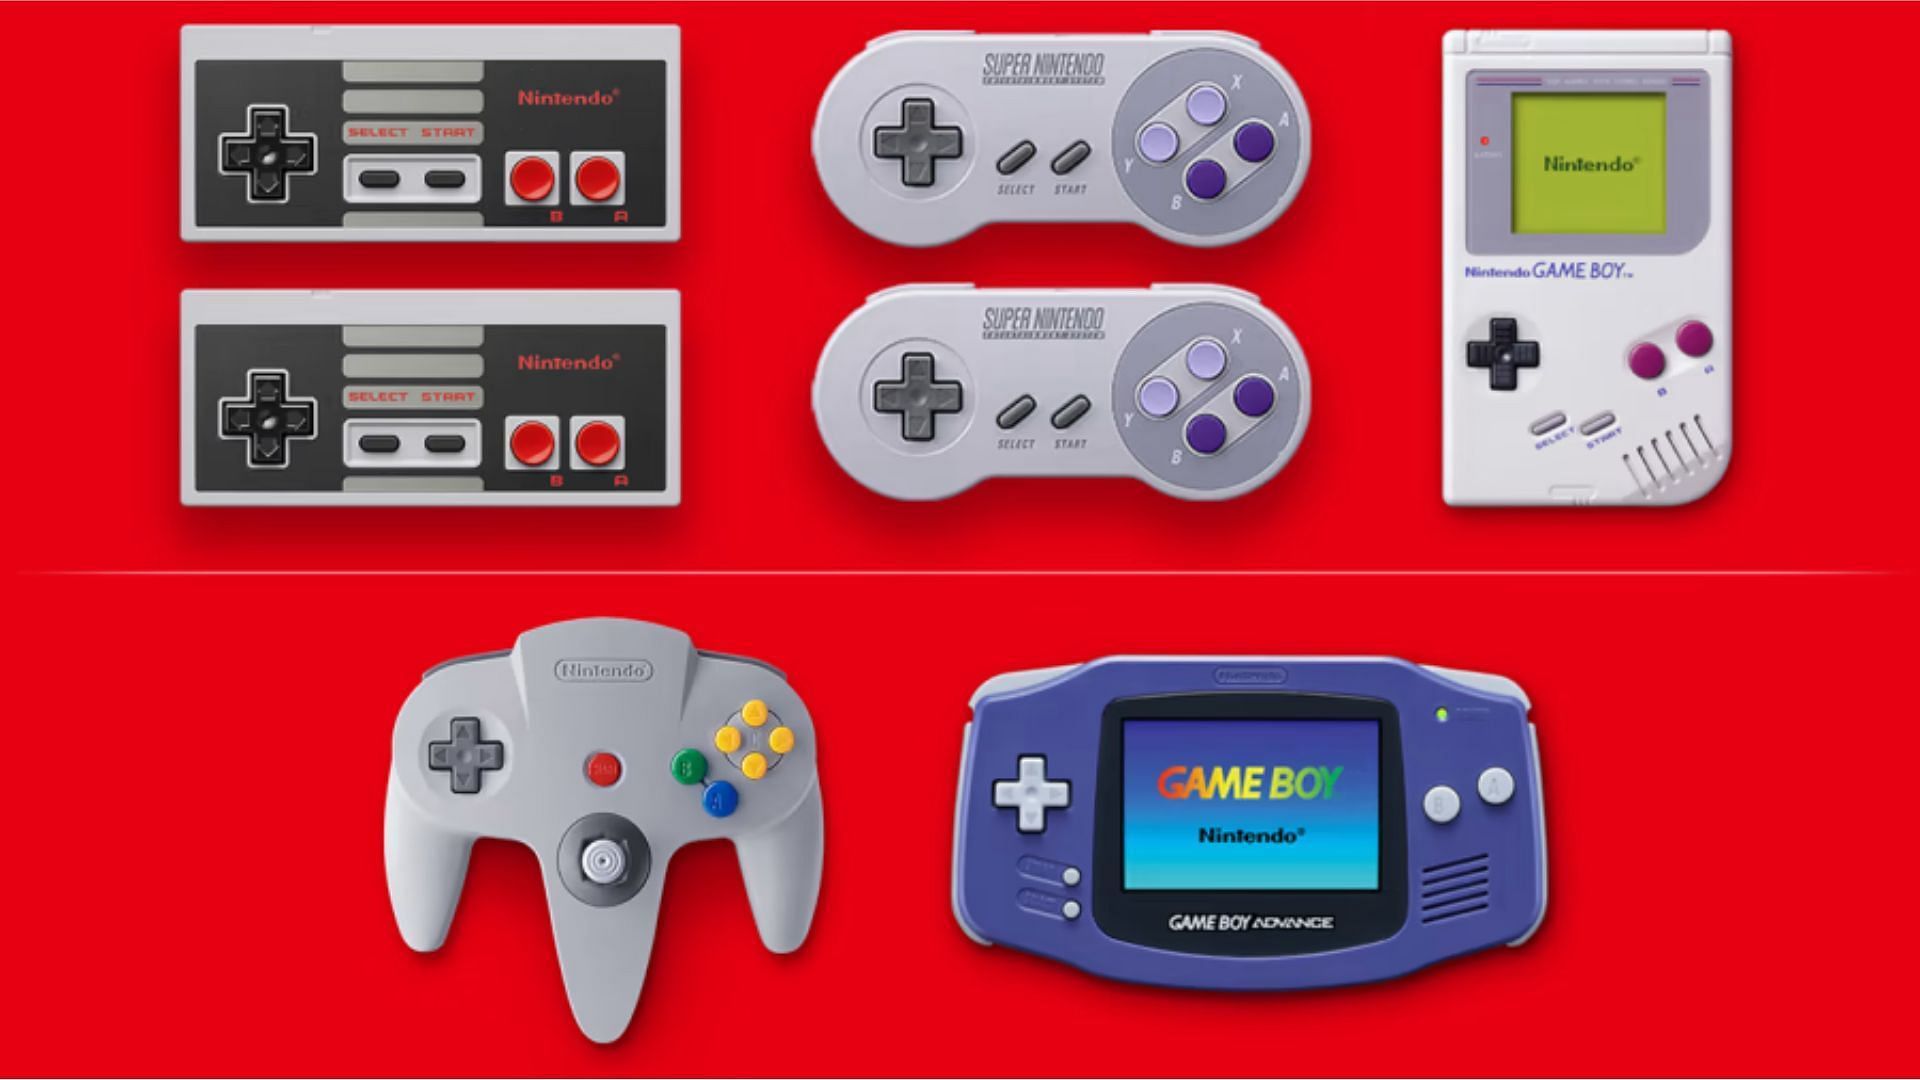 Expansion pack adds Gameboy, N64, and Sega Genesis games to the subscription. (Image via Nintendo)